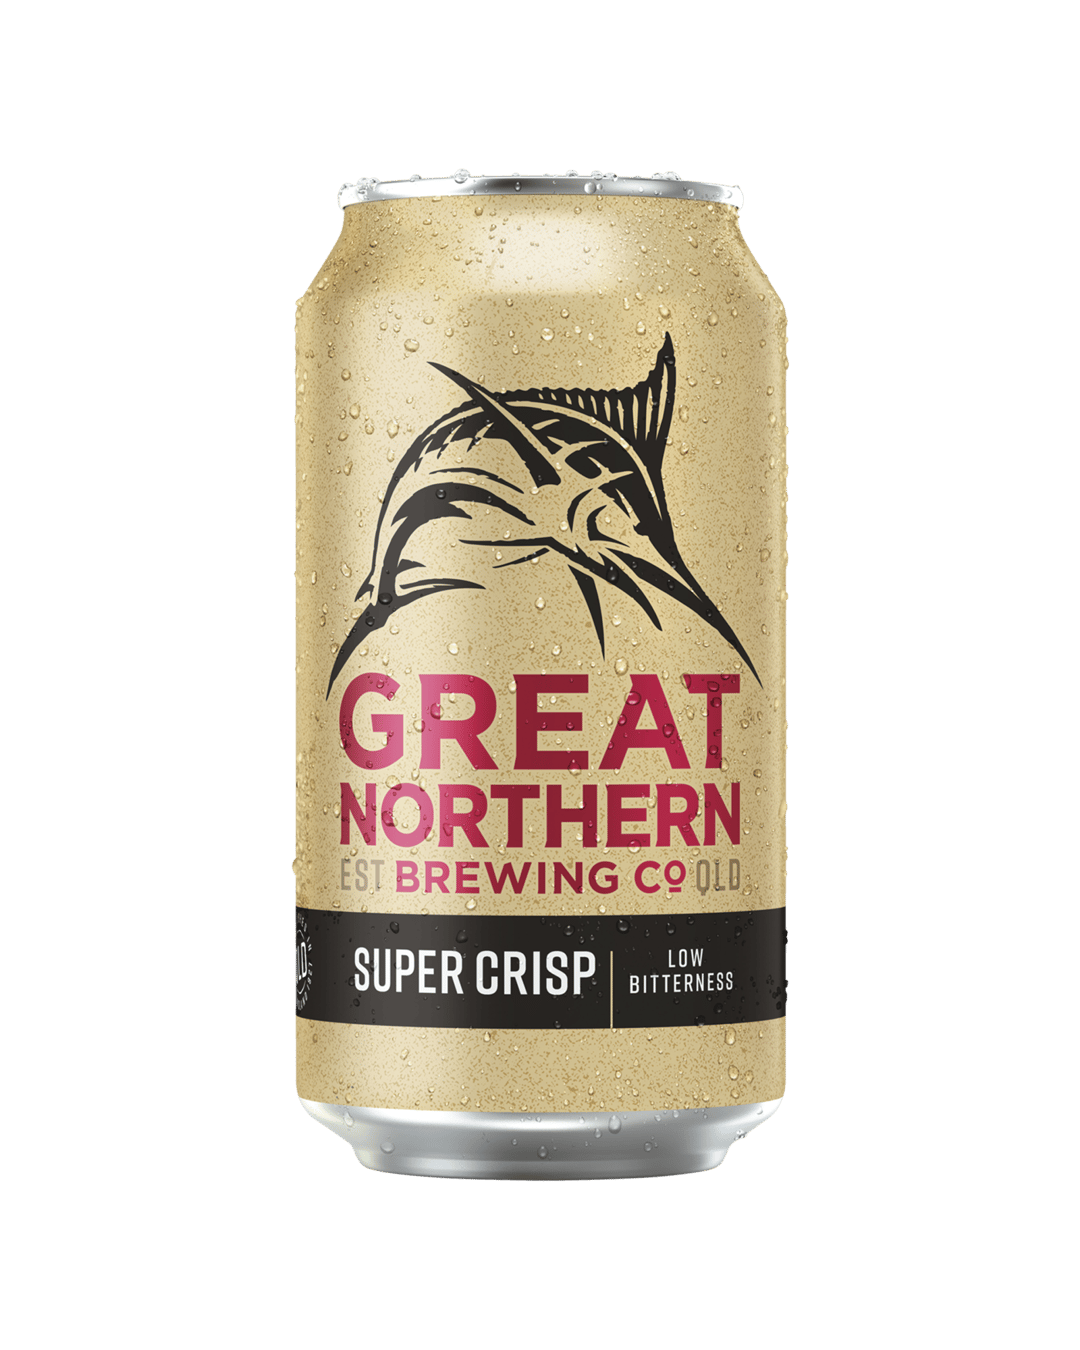 Buy Iron Jack Crisp Lager Cans Online With Same Day Free Delivery In Australia At Everyday